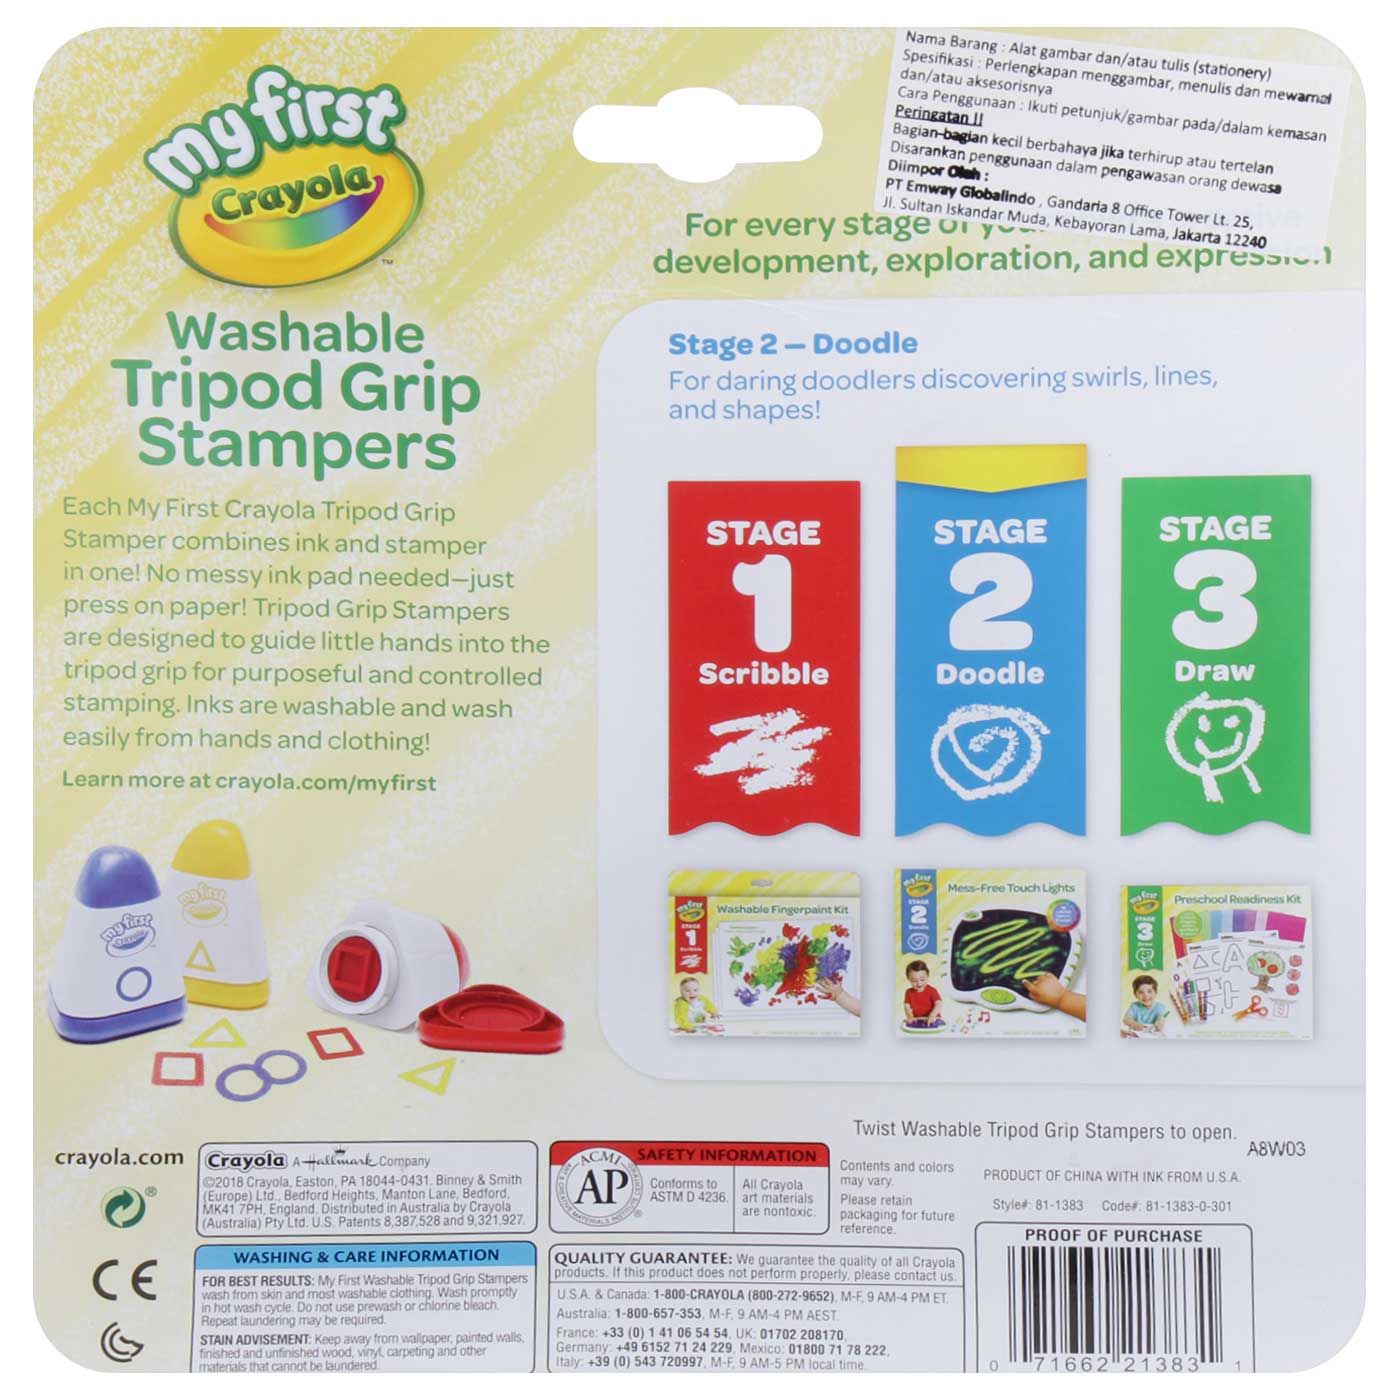 Crayola MFC Washable Tripod Grip Stampers - 2